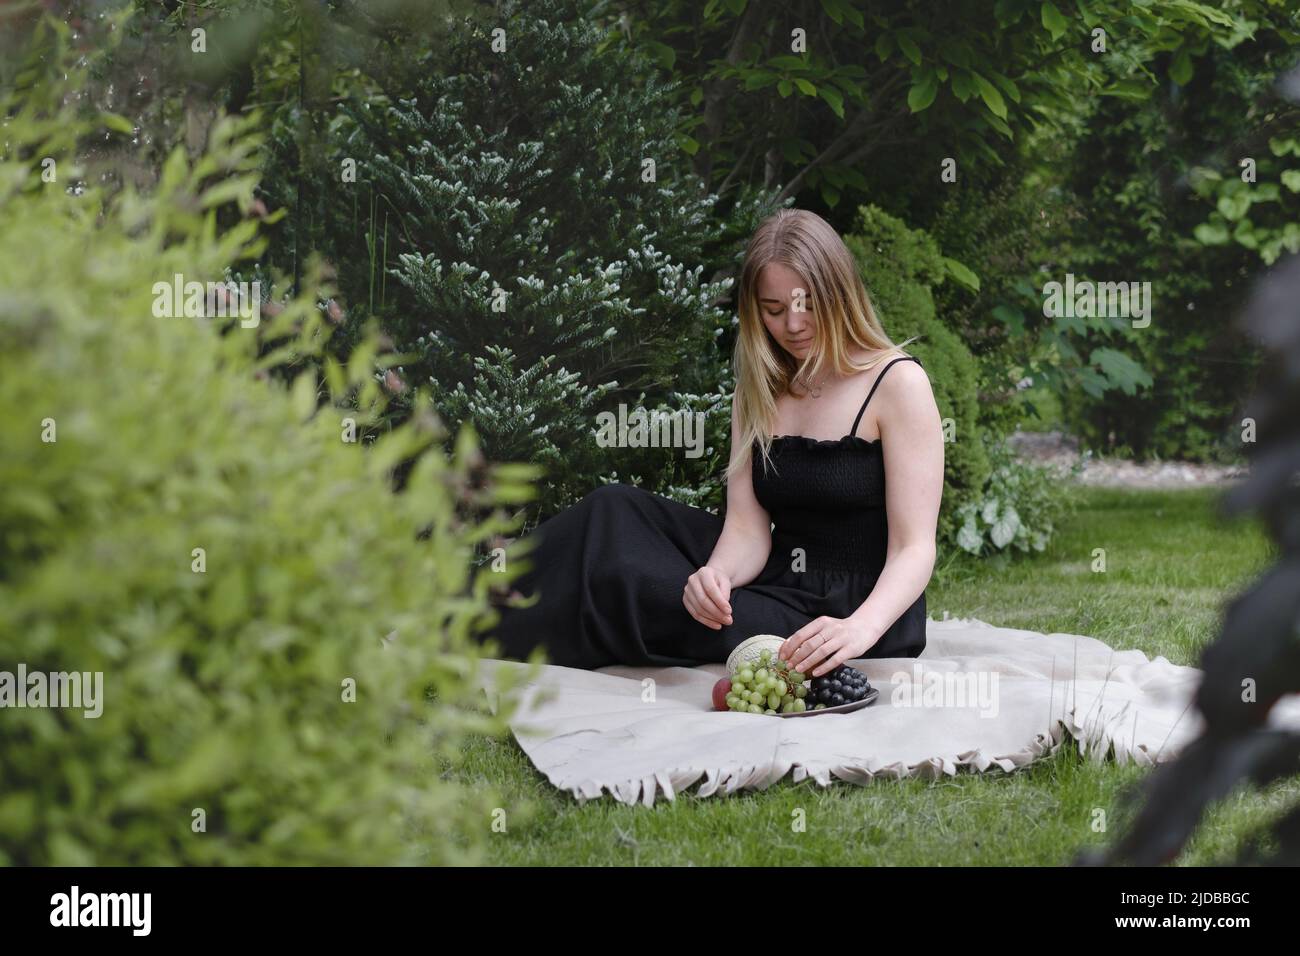 Woman on picnic in green garden On blanket. Cheerfully female spend time outdoors, eating summer fruits. Vegetarian eco idea for weekend picnic Stock Photo